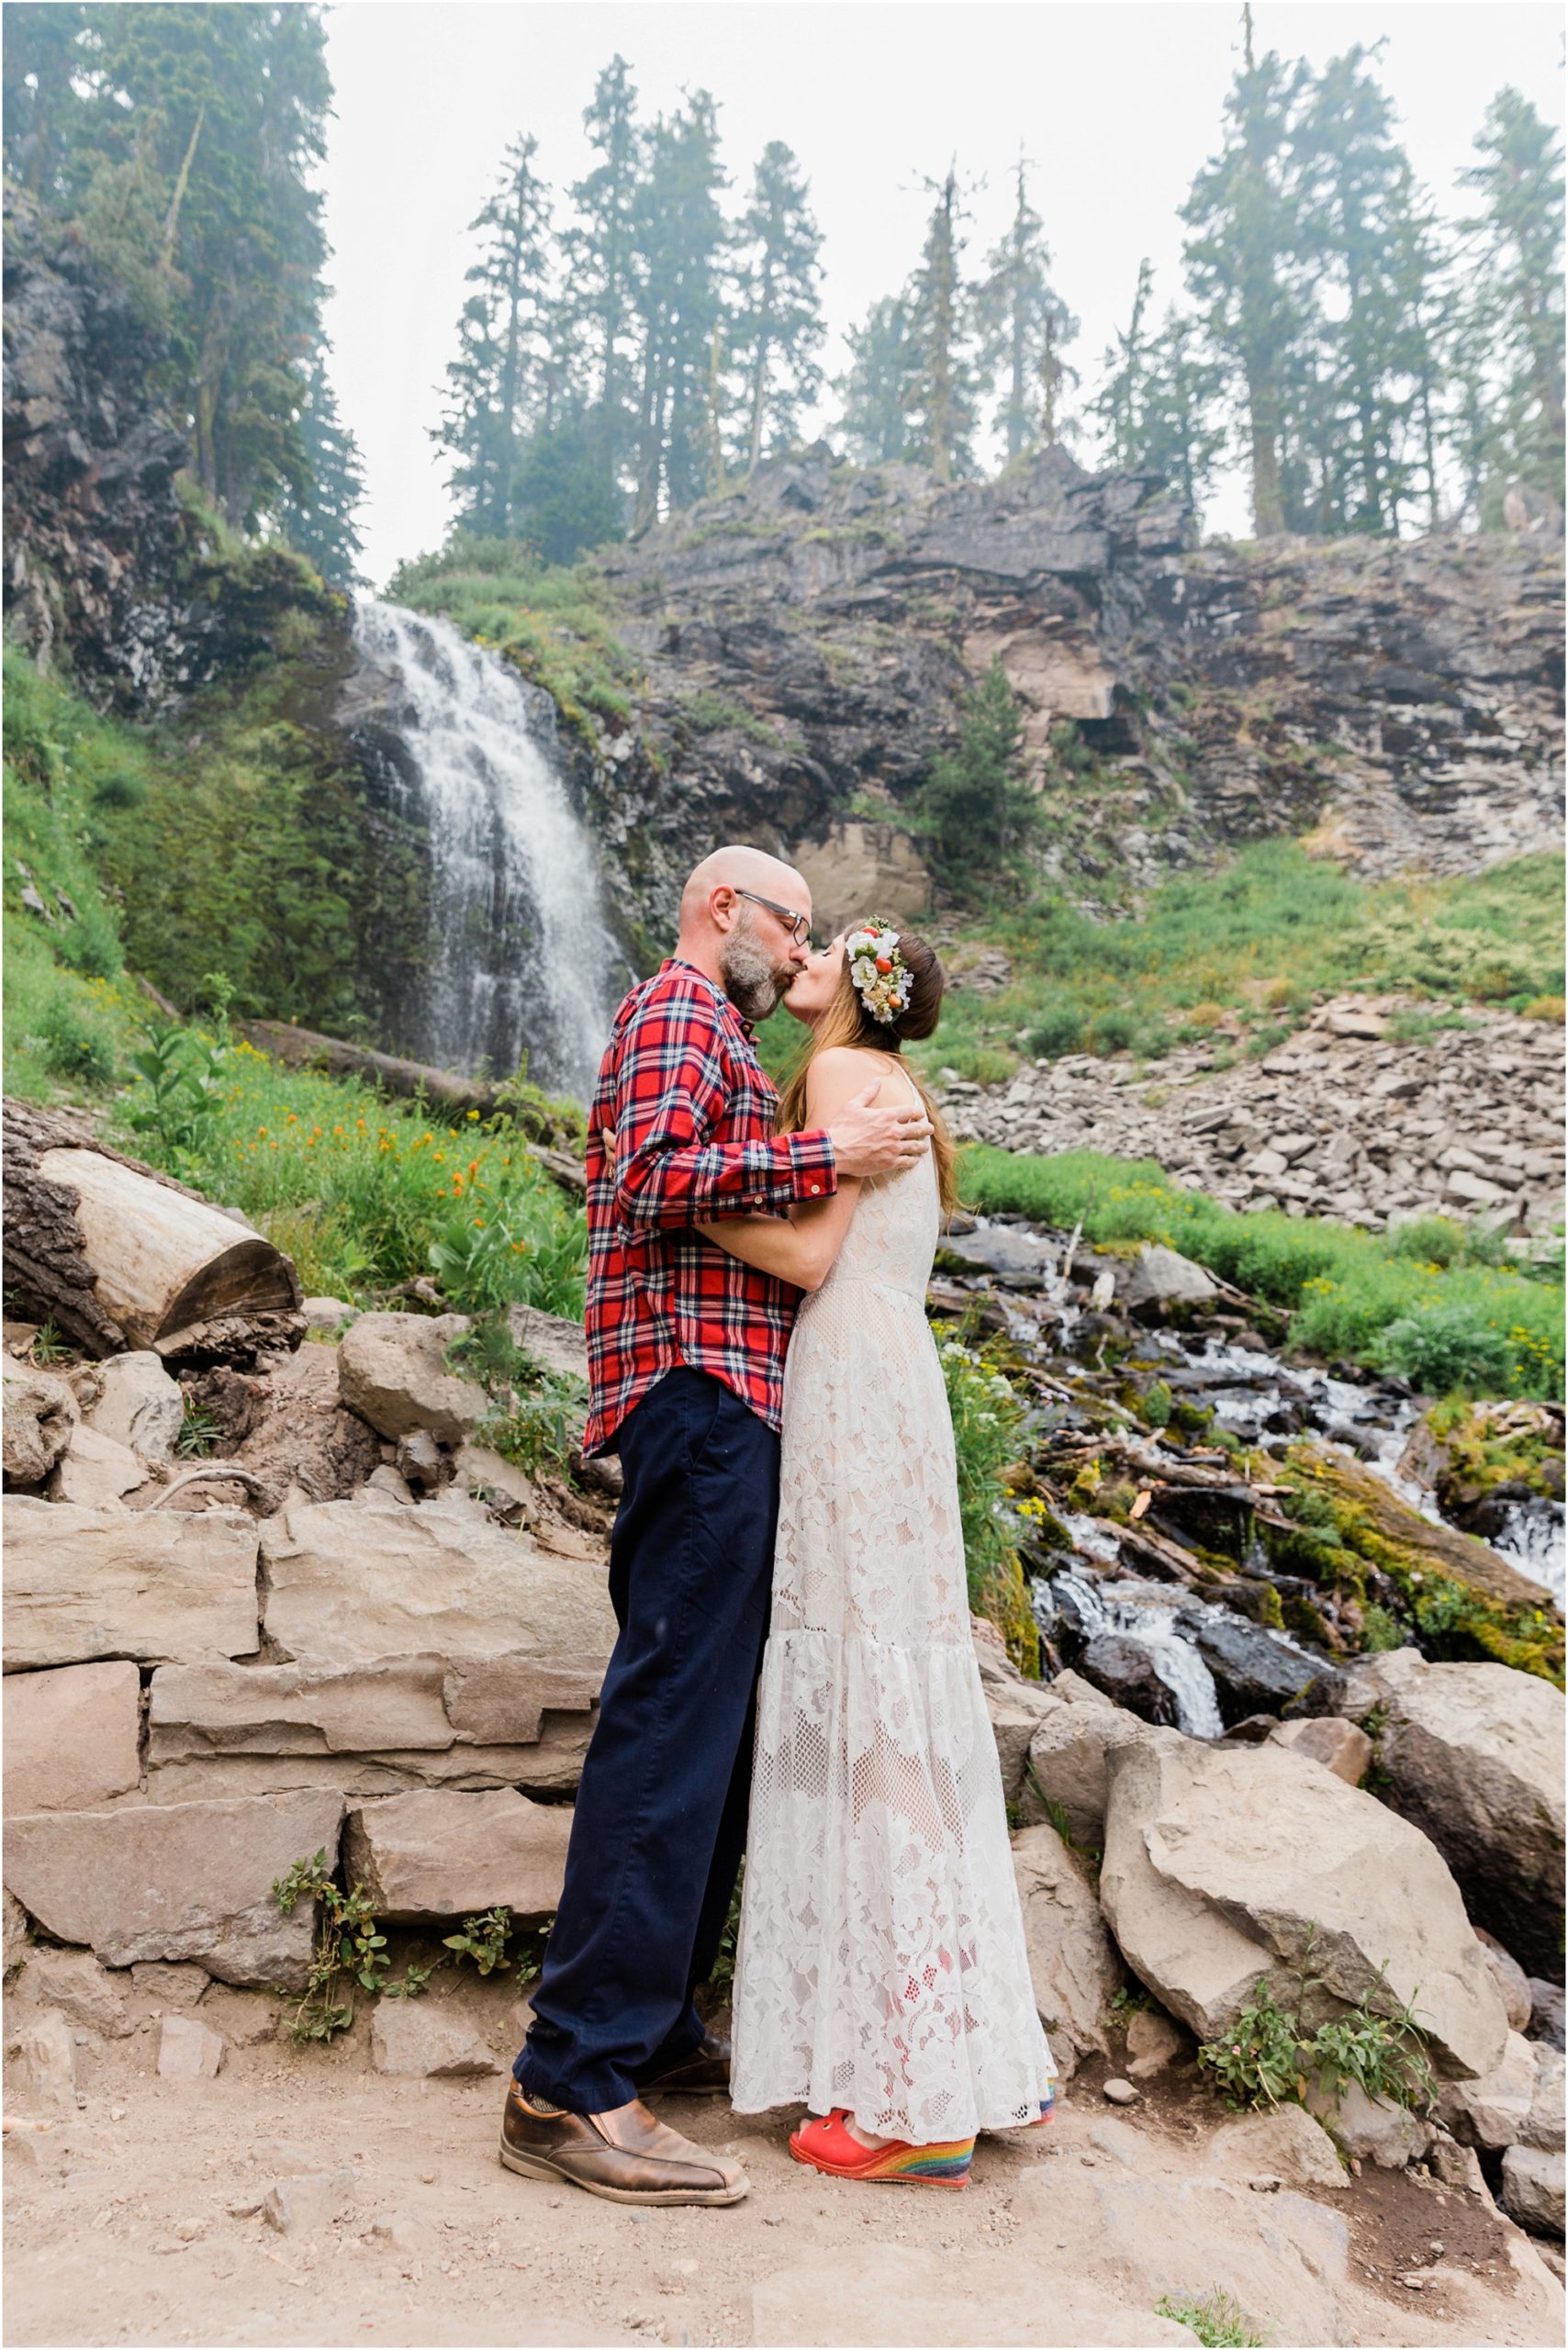 A couple exchanges their first kiss as husband and wife after their wedding ceremony at Crater Lake National Park in Oregon. | Erica Swantek Photography